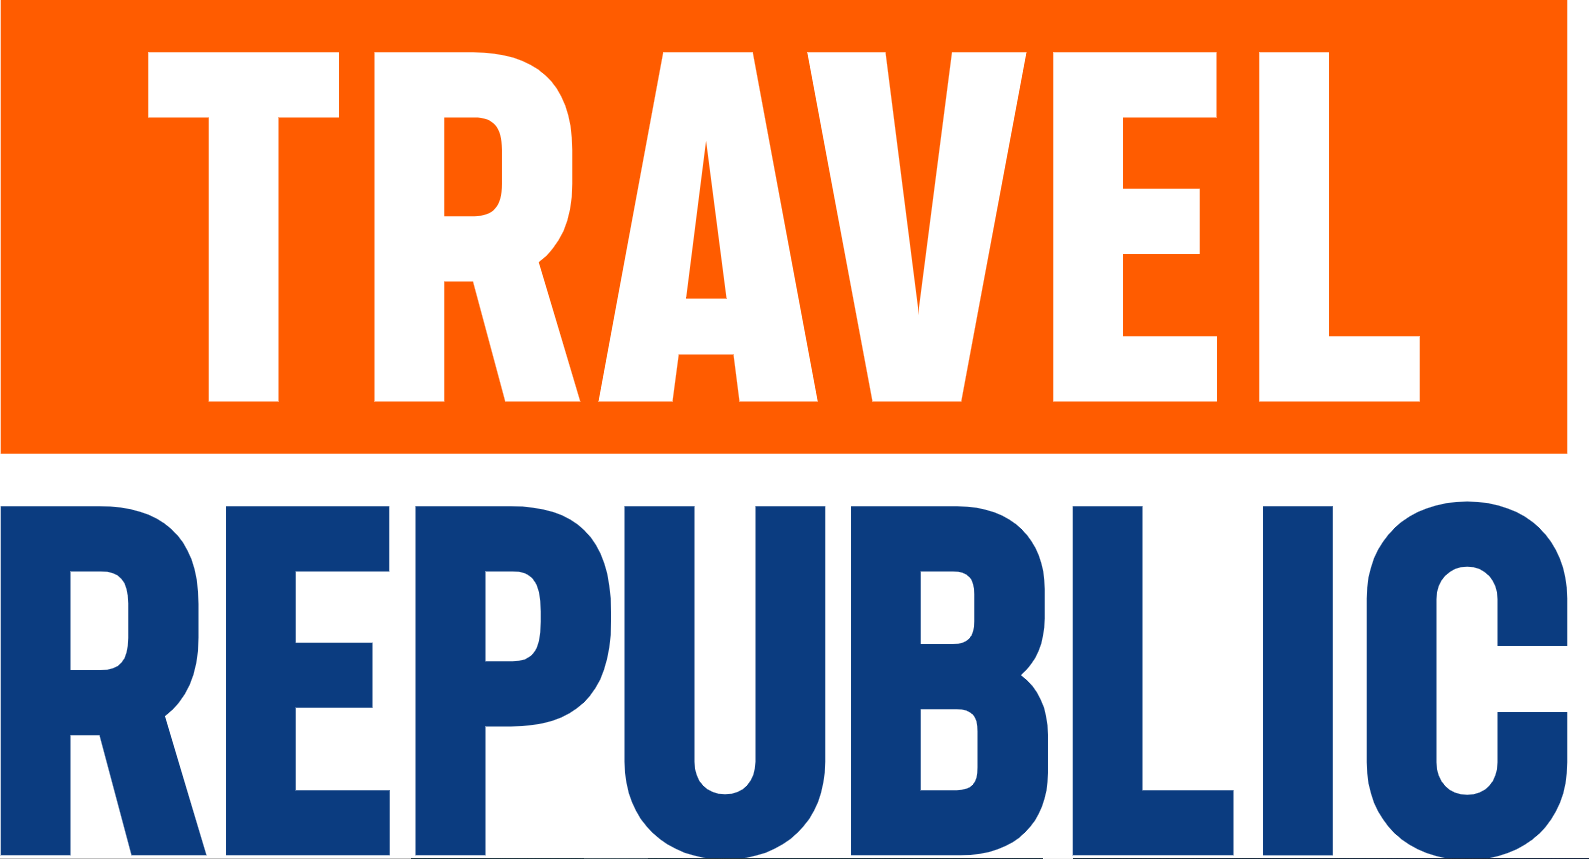 About Travel Republic